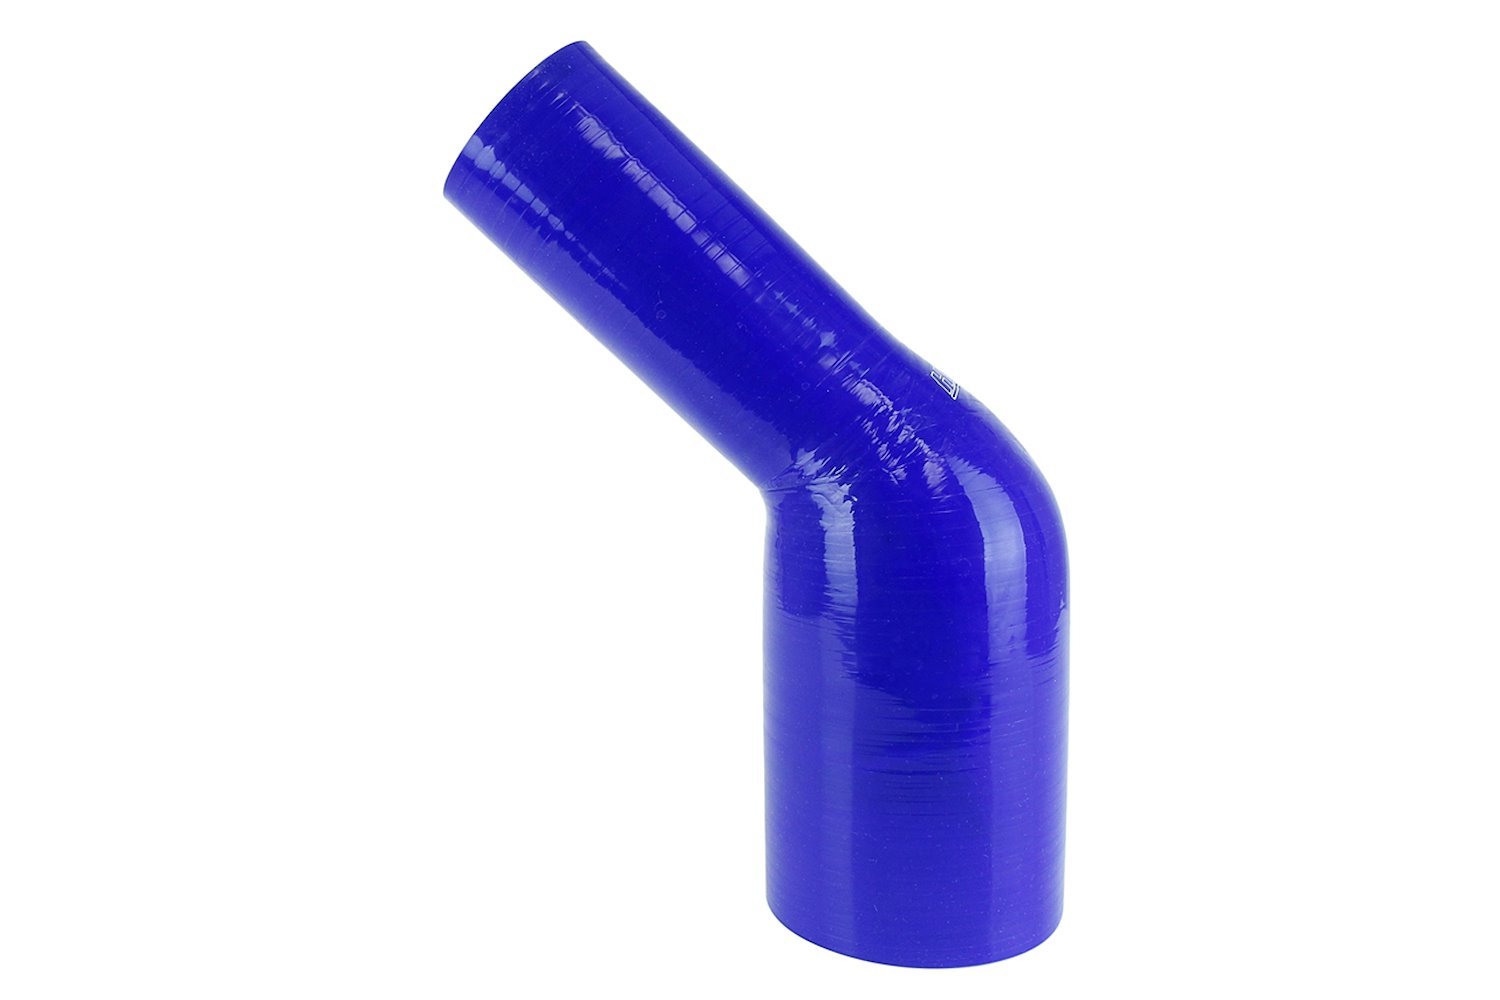 HTSER45-225-300-BLUE Silicone 45-Degree Elbow Hose, High-Temp 4-Ply Reinforced, 2-1/4 in. - 3 in. ID, Blue